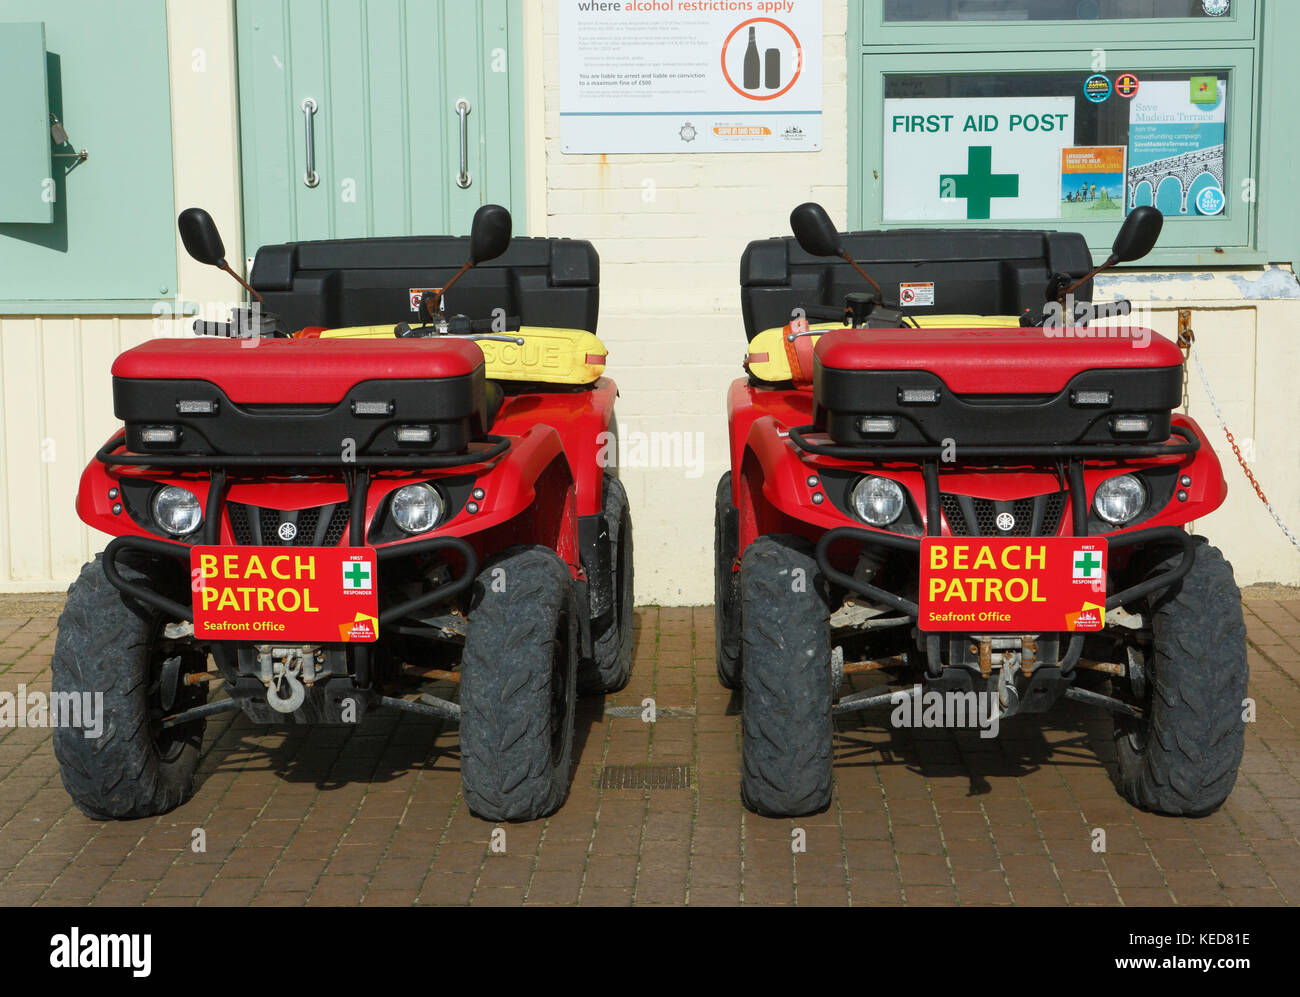 Beach patrol quad bikes at the seafront office / first aid post, Brighton, East Sussex, England, UK Stock Photo